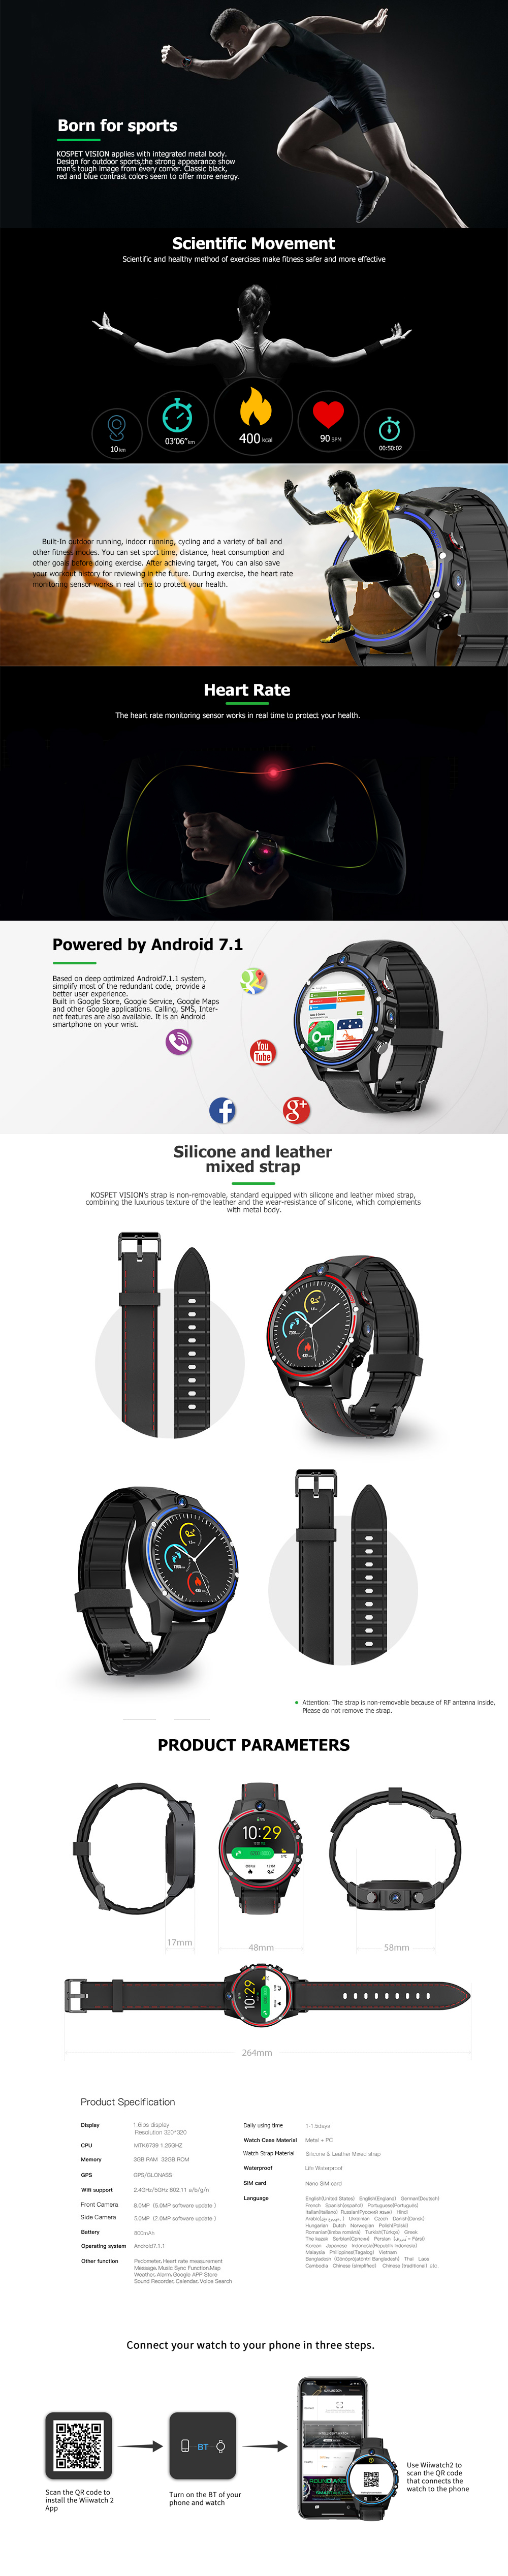 Kospet Vision 1.6' LTPS Crystal Display 3G+32G 5.0MP Front-facing Dual Camera 4G-LTE Video Call 800mAh Google Play Leather Strap Smart Watch Phone 17